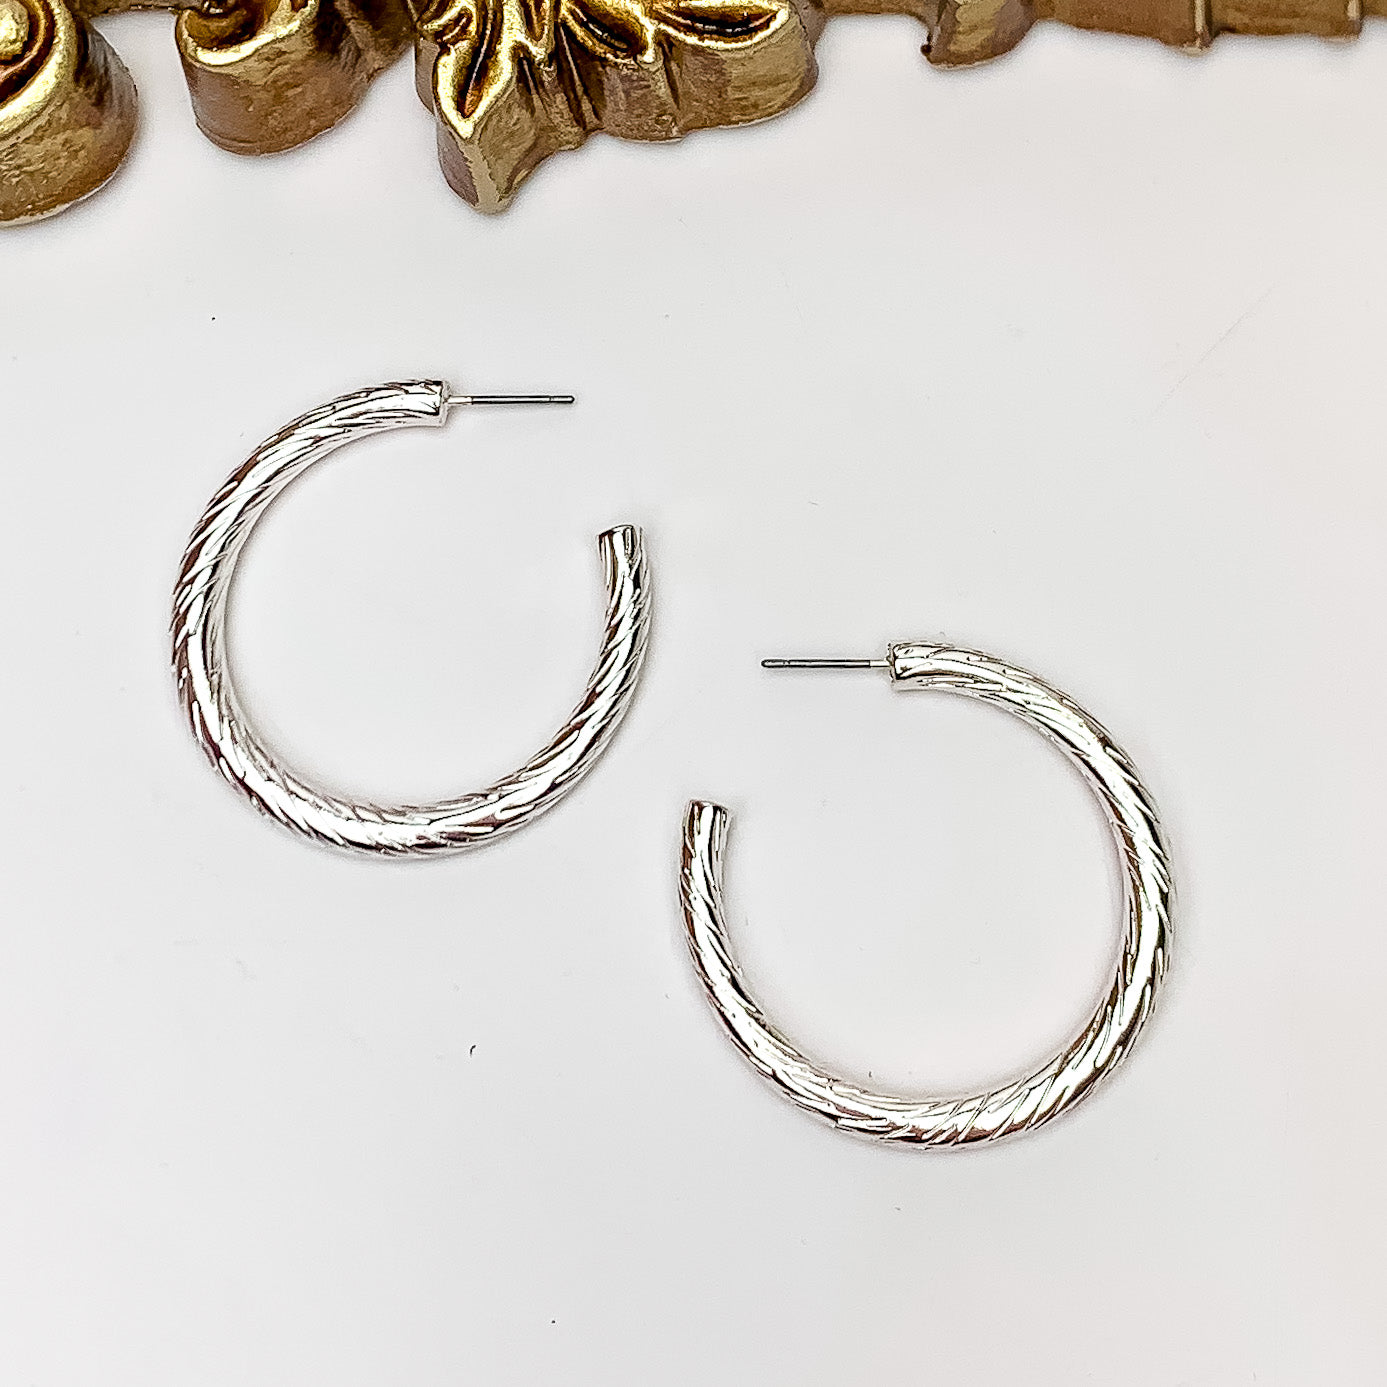 Silver Tone Large Twisted Hoop Earrings - Giddy Up Glamour Boutique